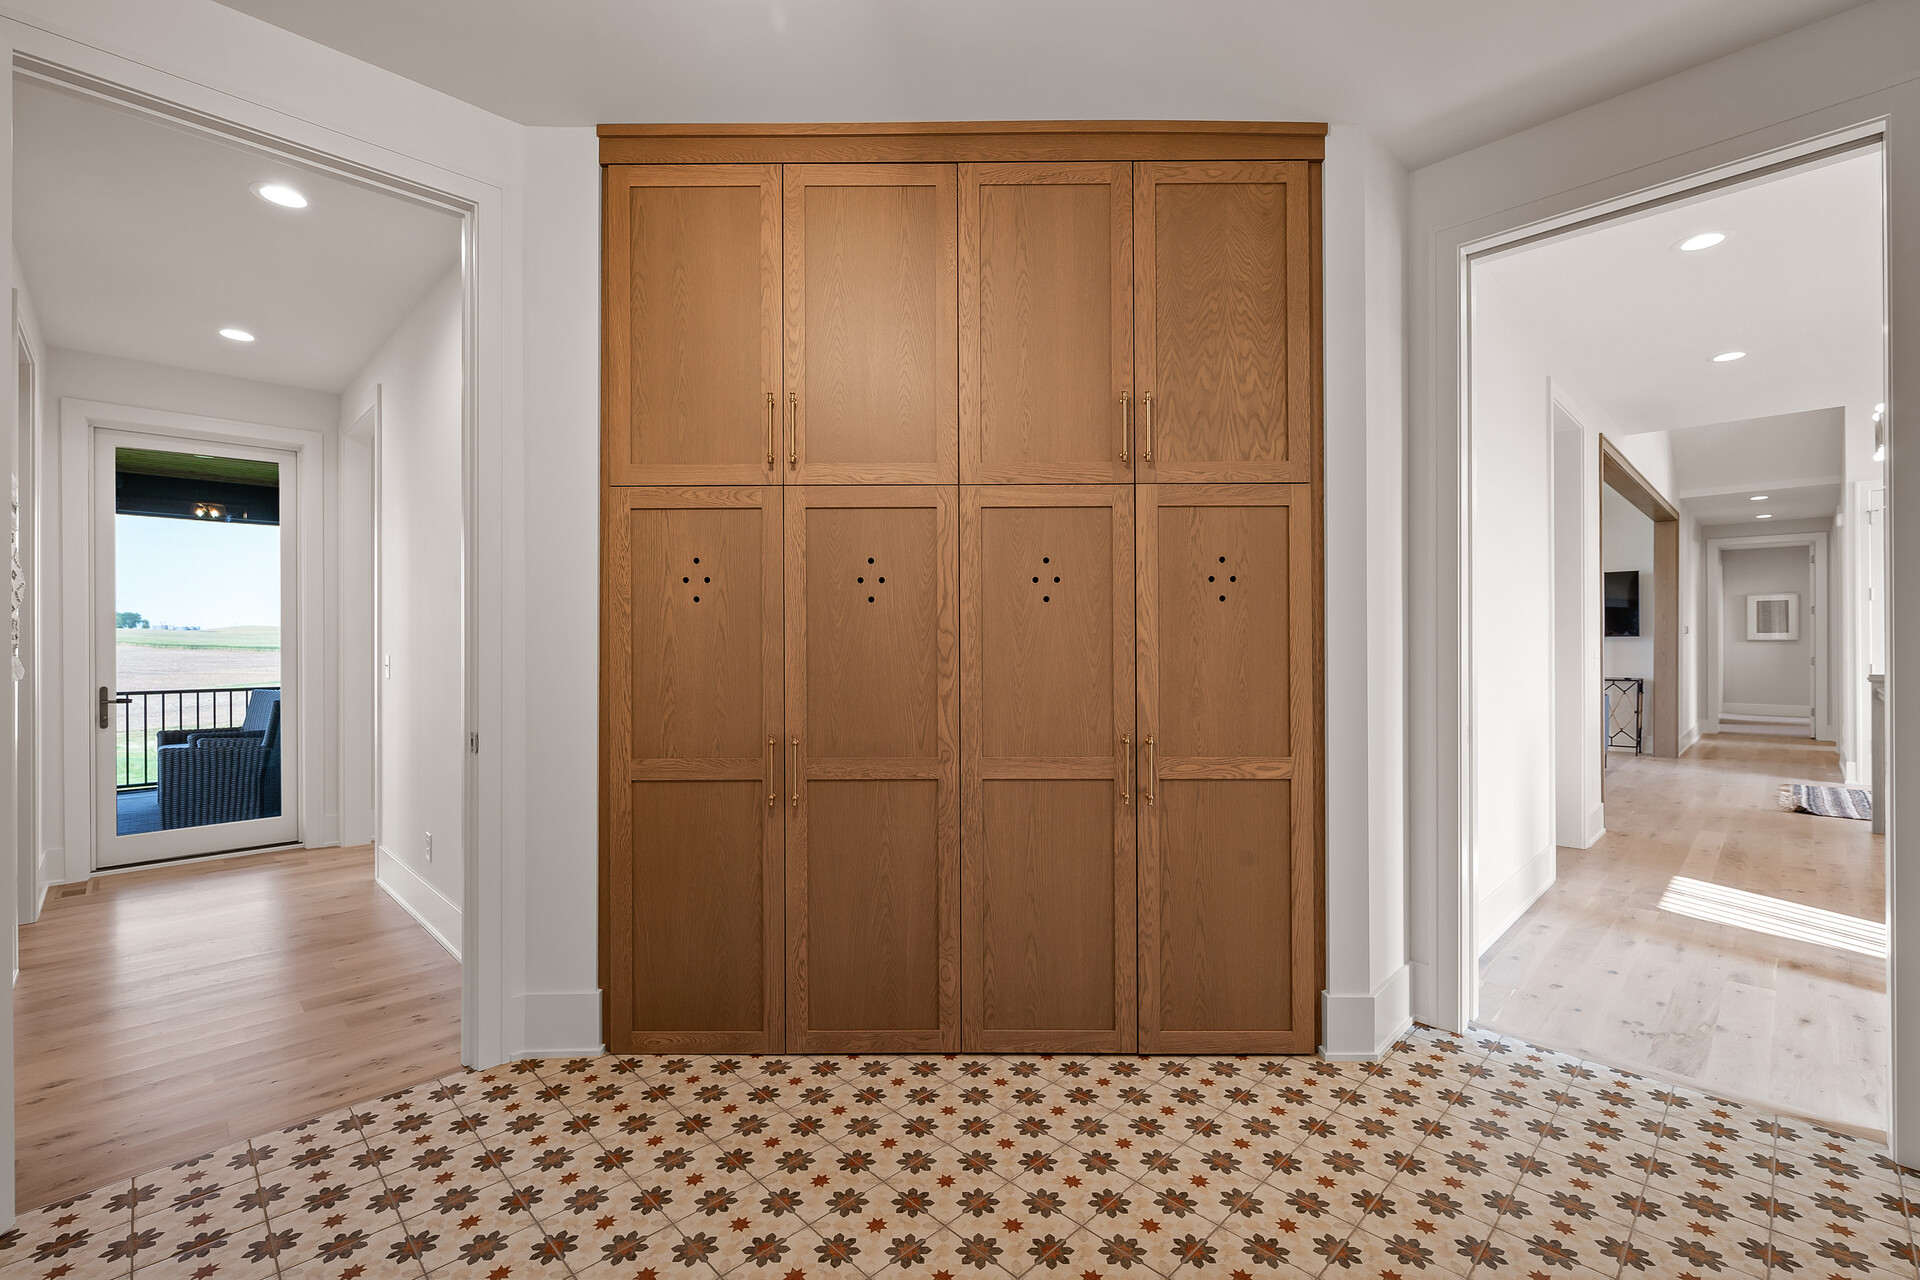 A prairie-style hallway adorned with wooden lockers and featuring a sleek tiled floor.